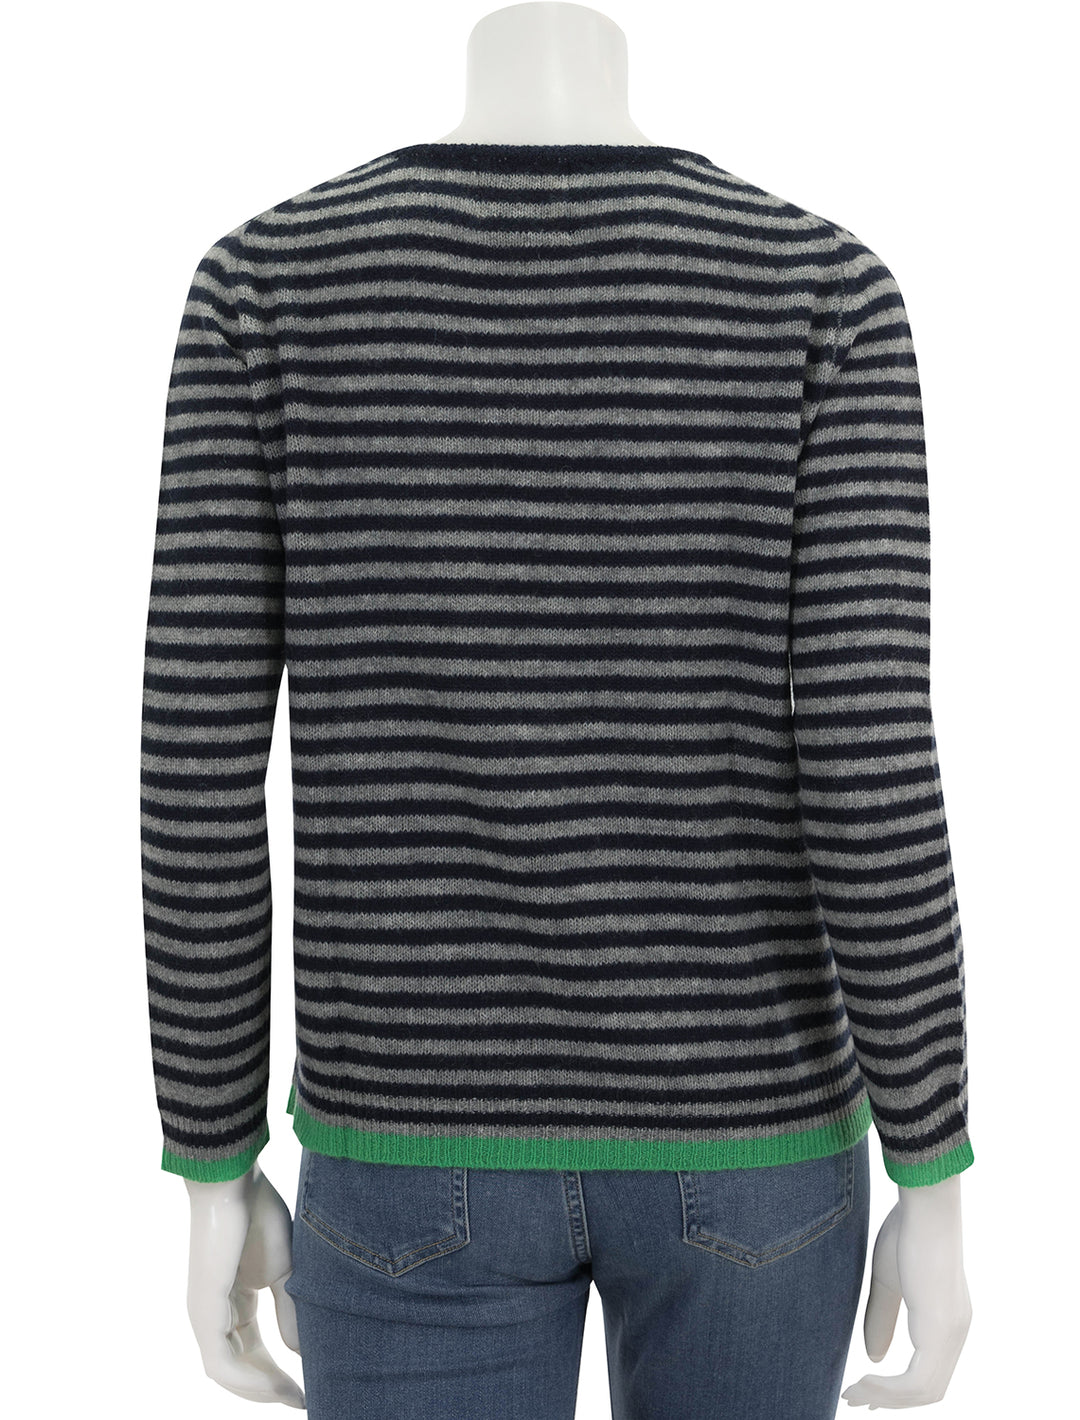 Back view of Jumper 1234's little stripe crew in navy, grey and green.